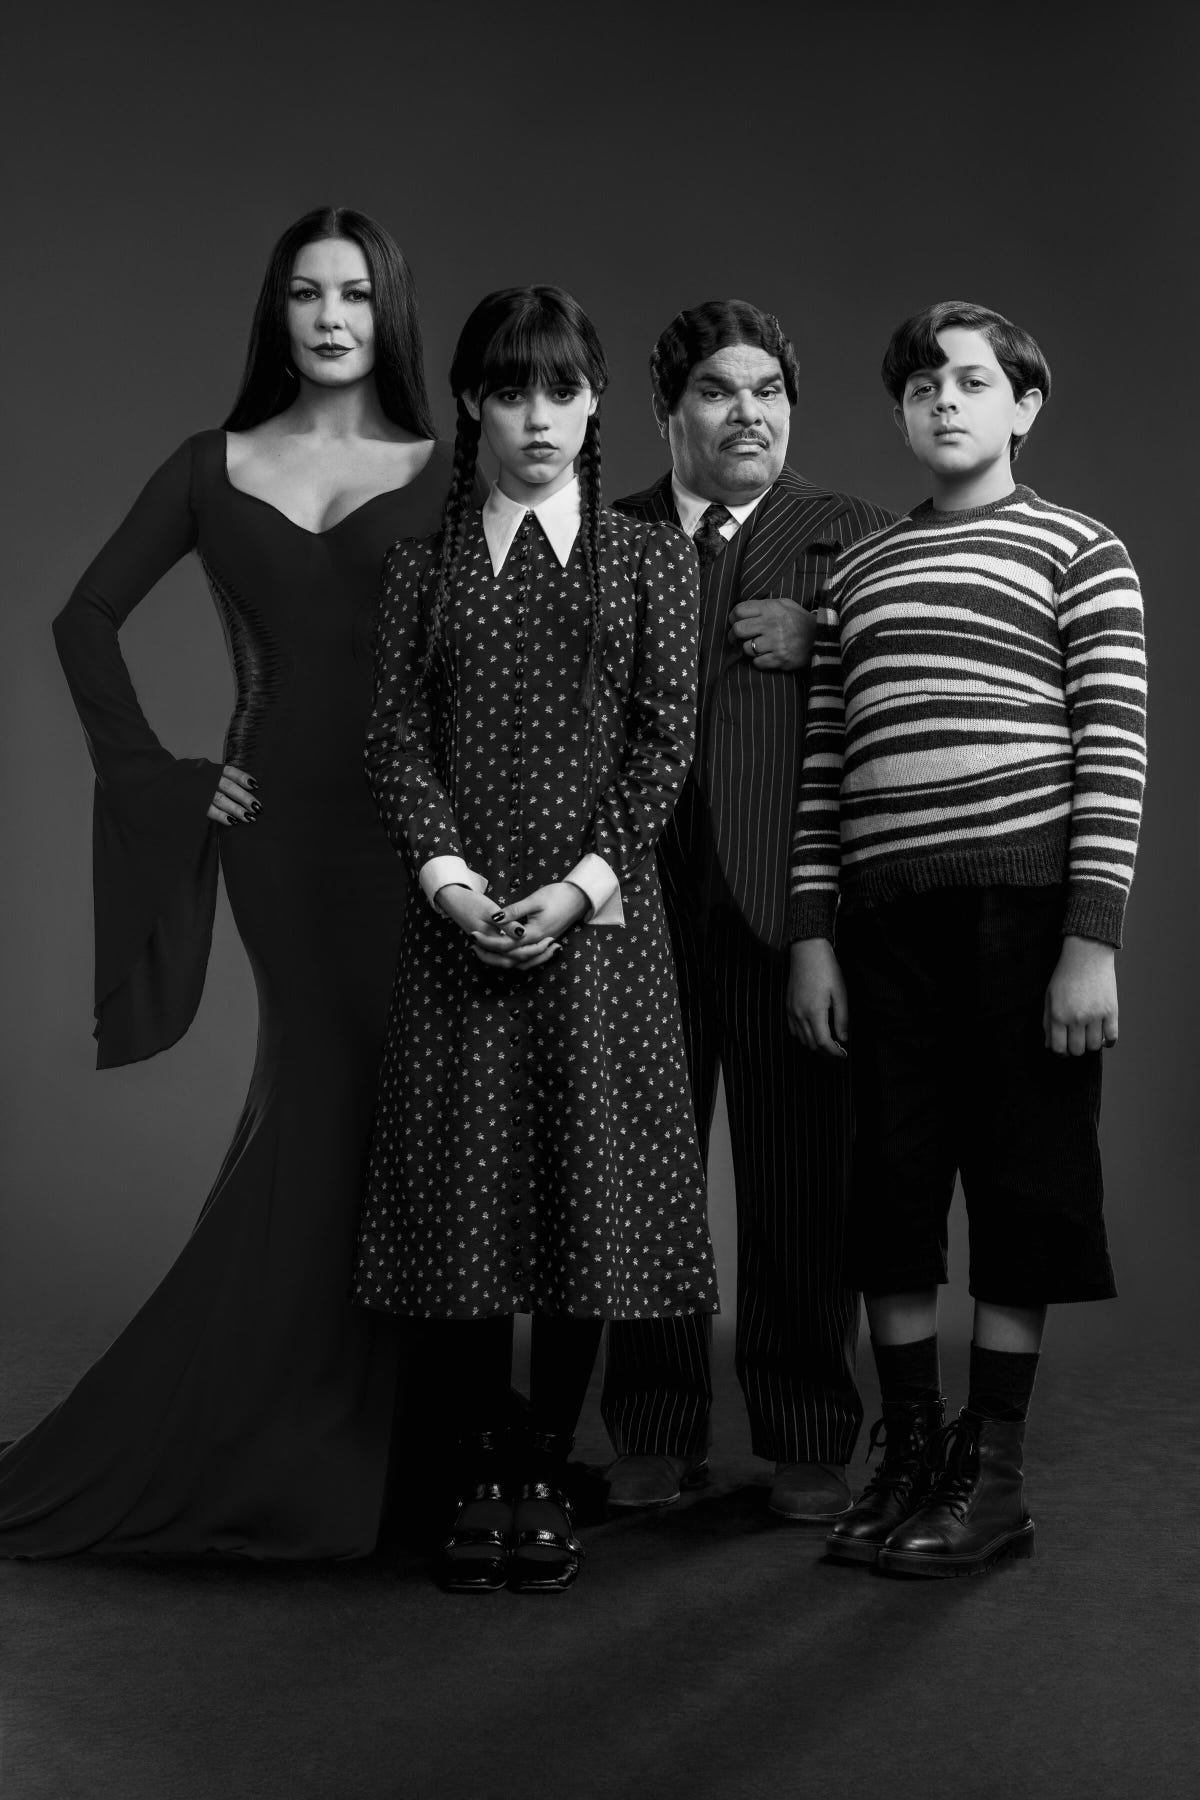 A family portrait of the comically gothic Addams Family.